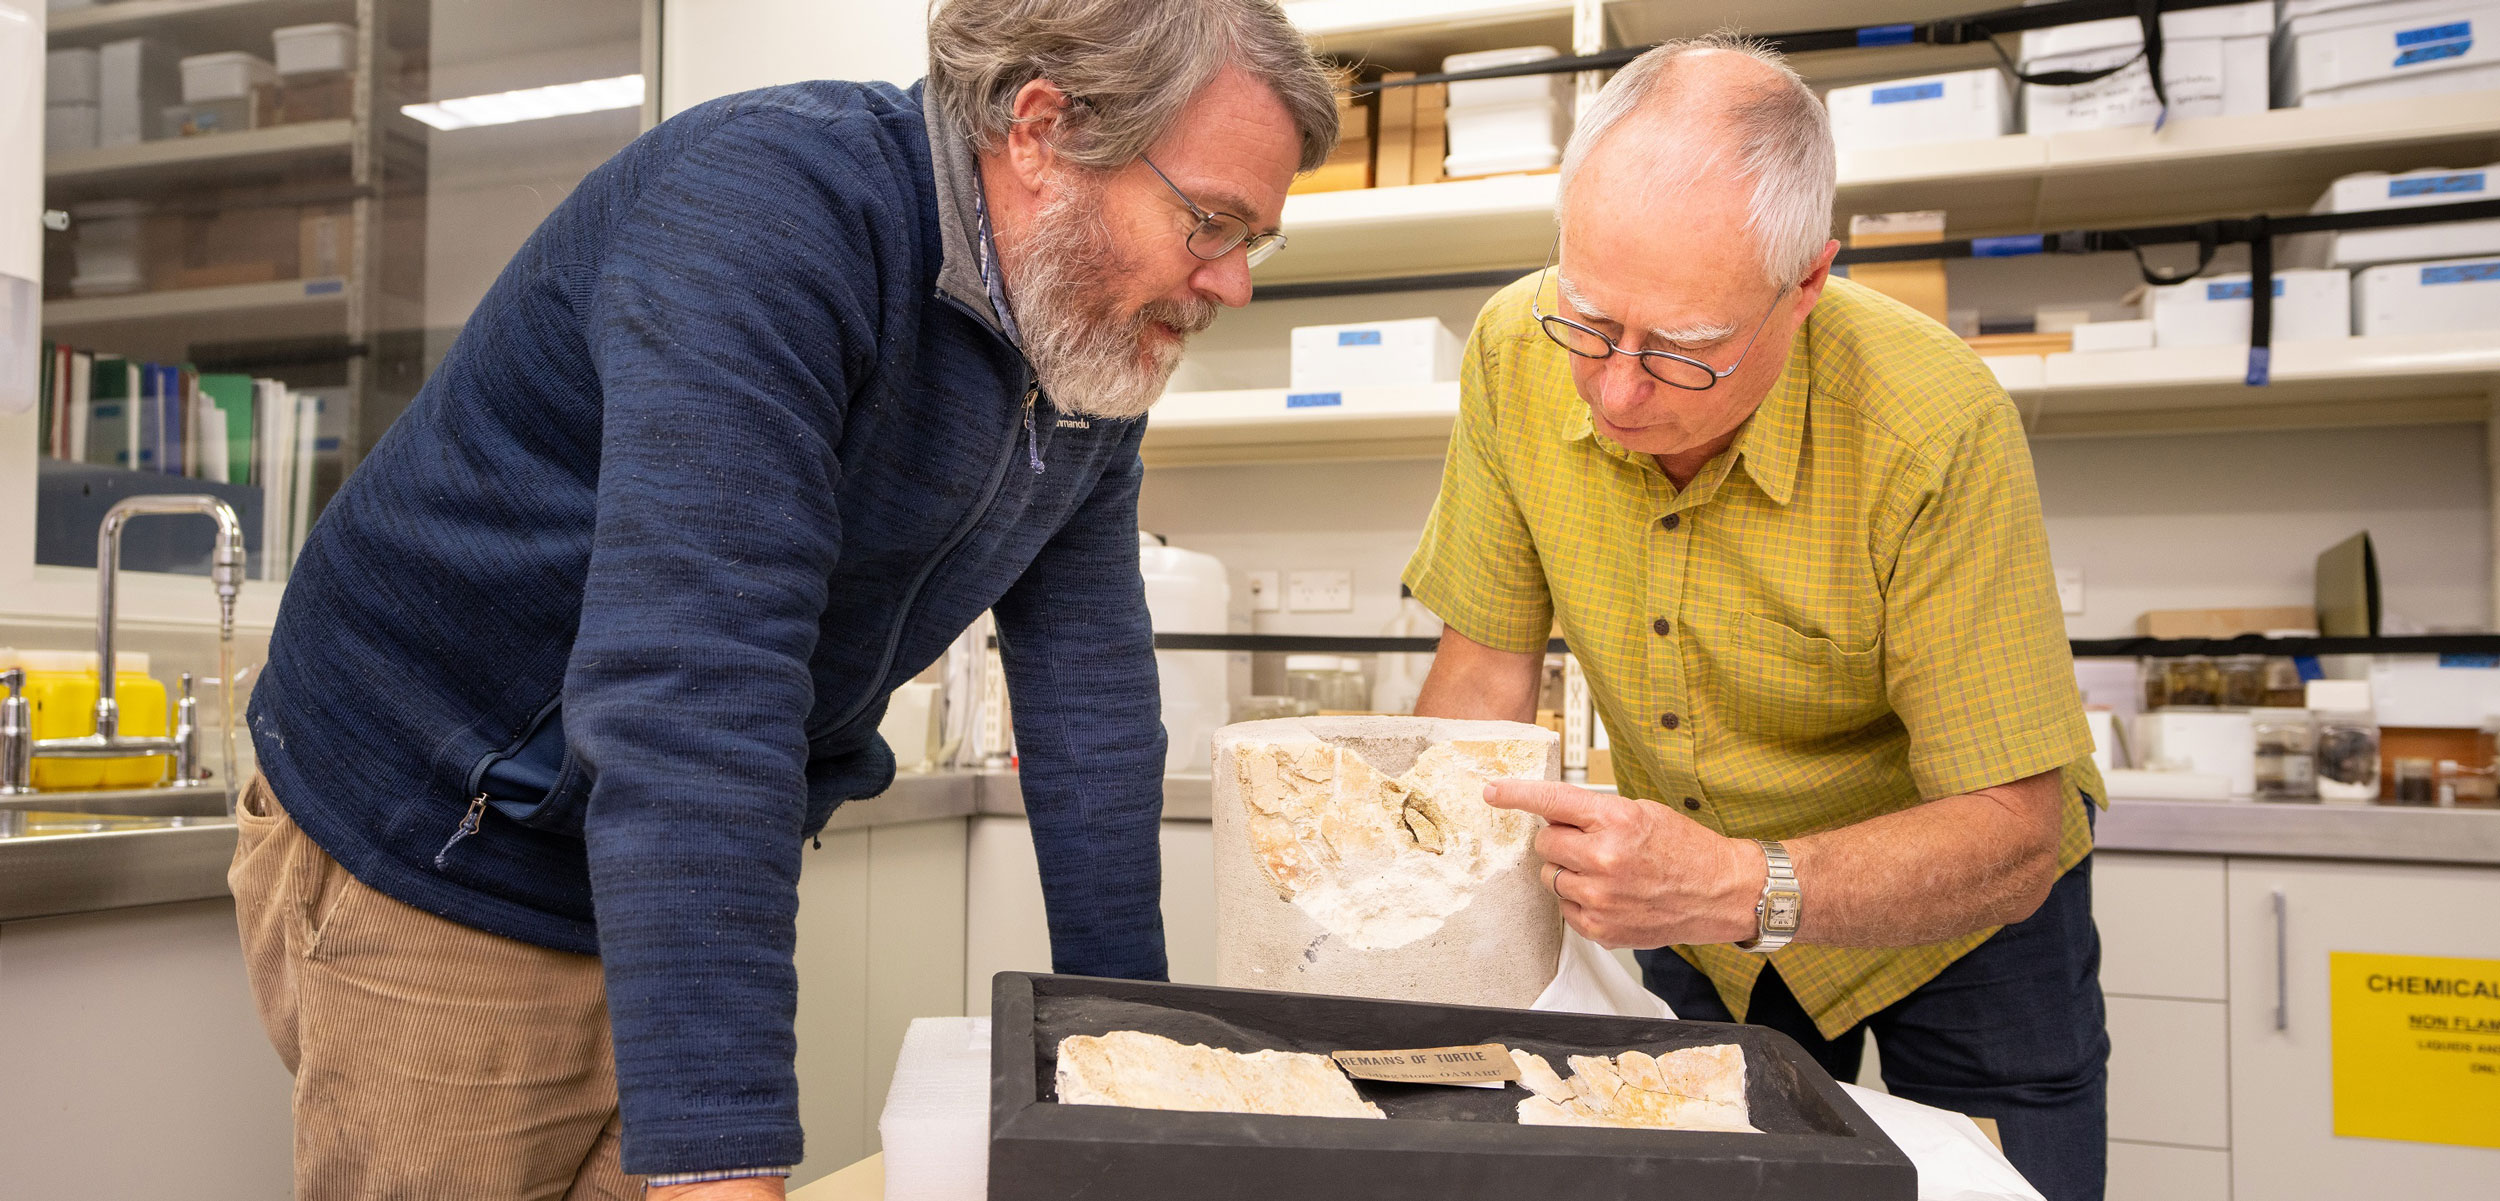 Paul Scofield (left) and Paul Dean (right) examine a fossilized turtle bone found in limestone that was once inside a pillar in the Oxford Terrace Baptist Church in Christchurch, New Zealand